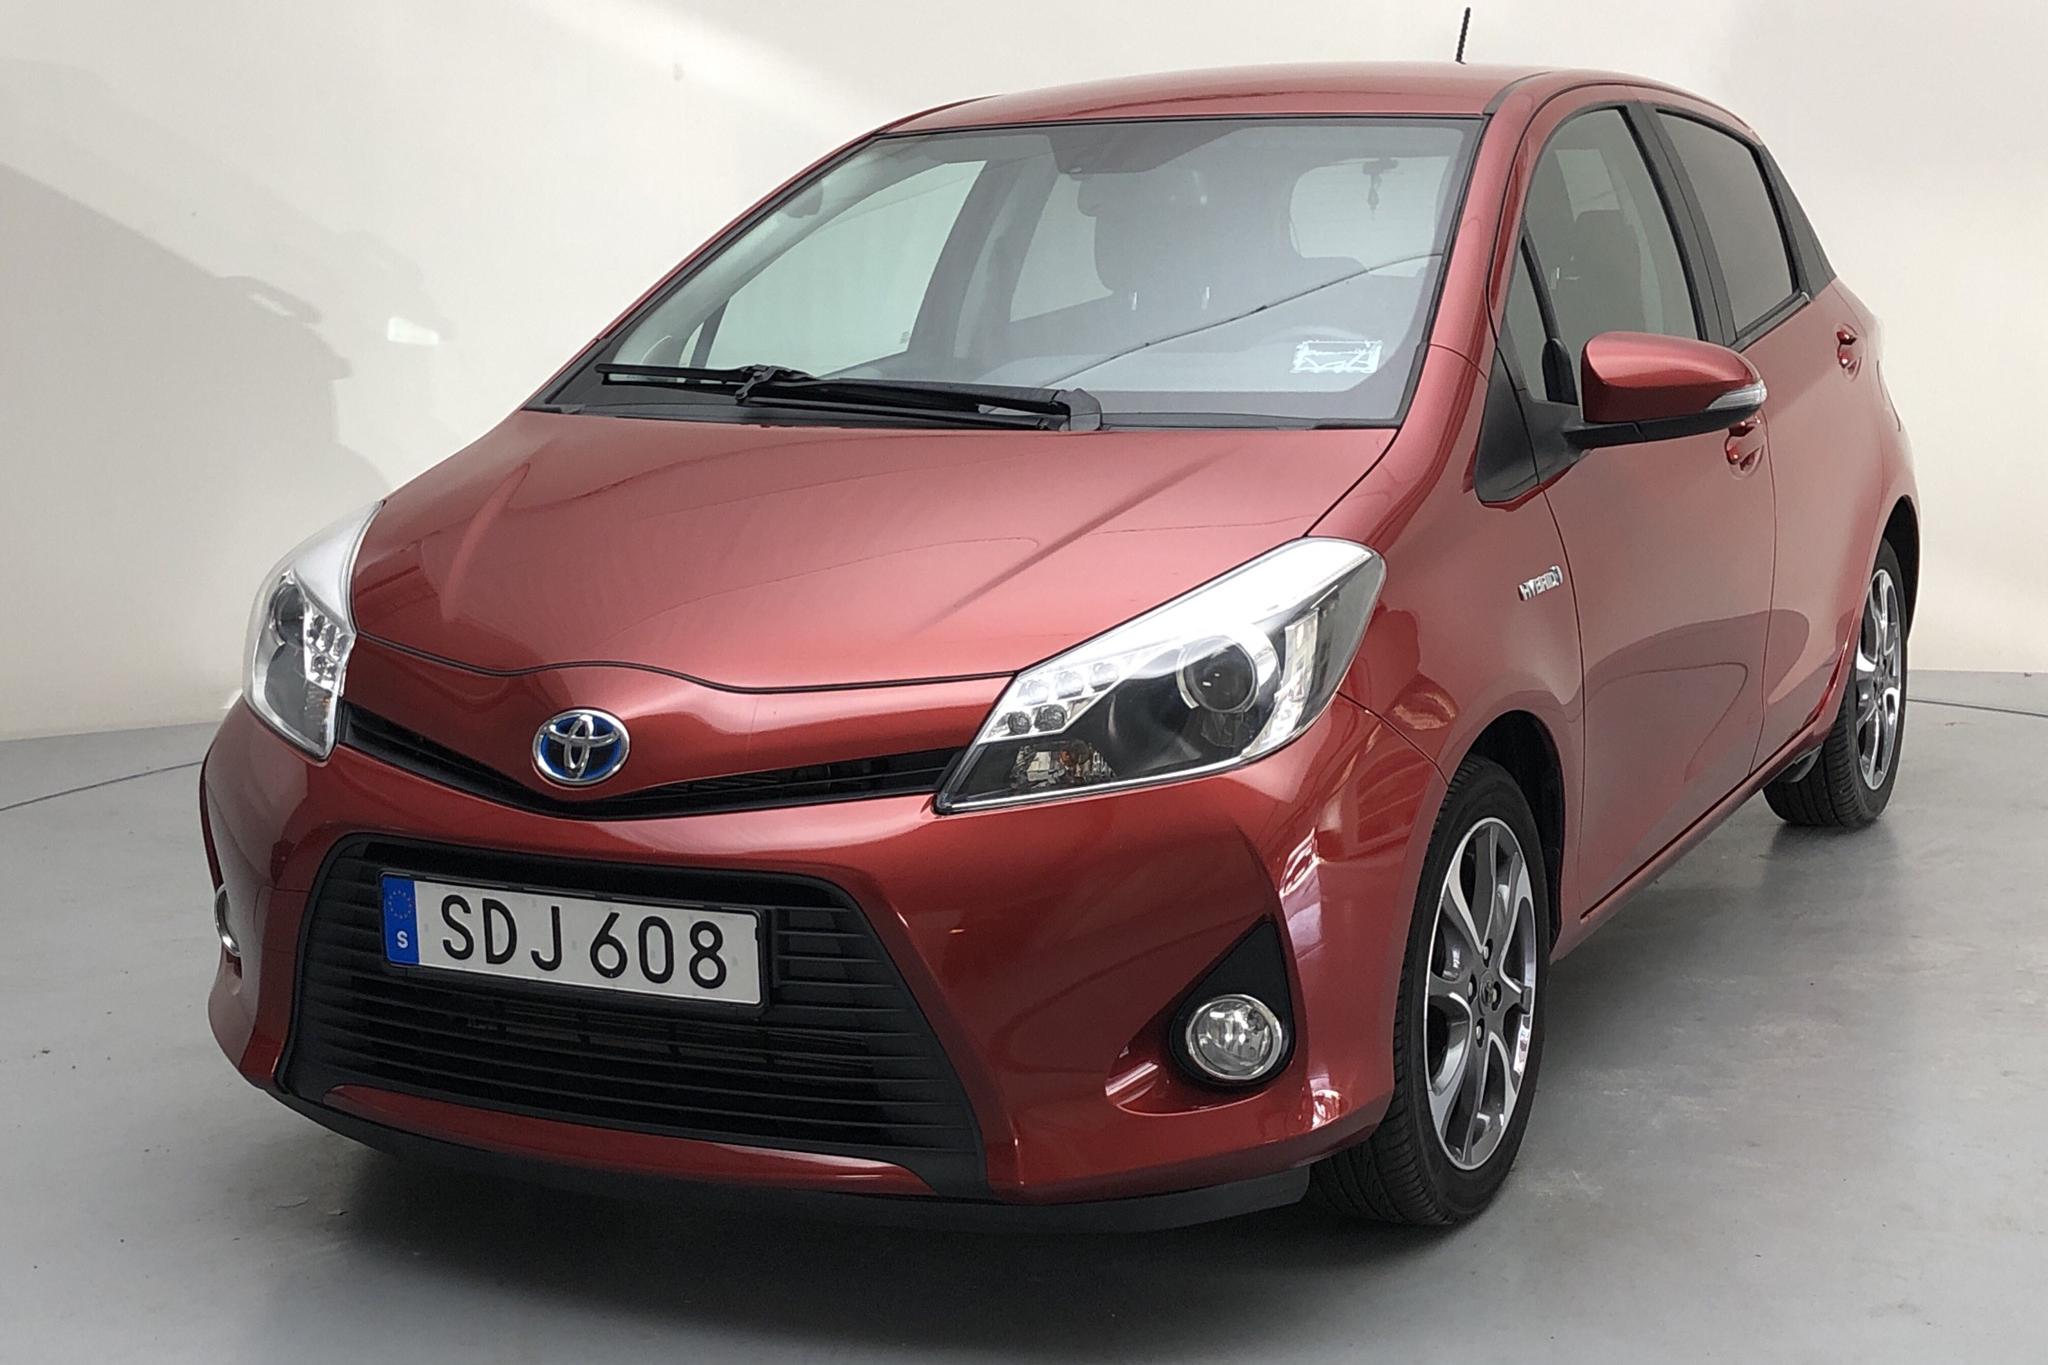 Toyota Yaris 1.5 HSD 5dr (75hk) - 91 070 km - Automatic - red - 2014